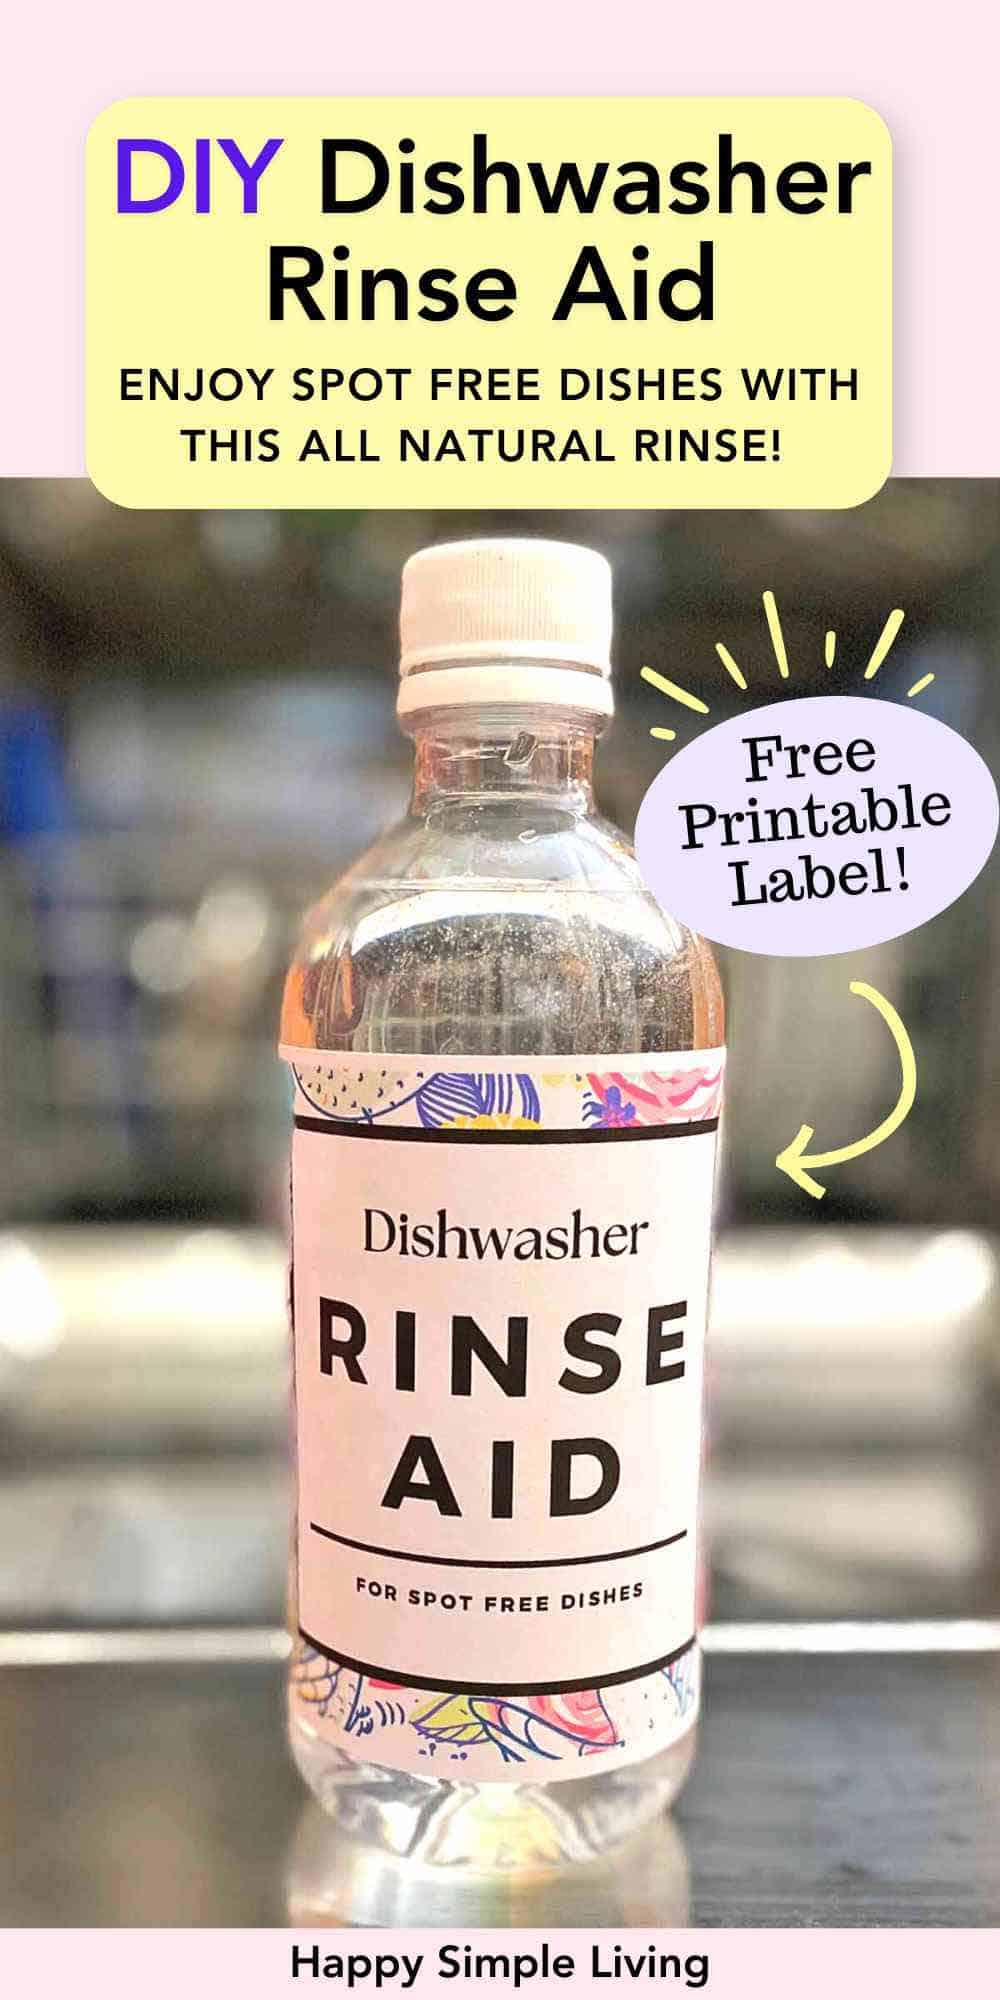 A bottle of homemade dishwasher rinse aid.